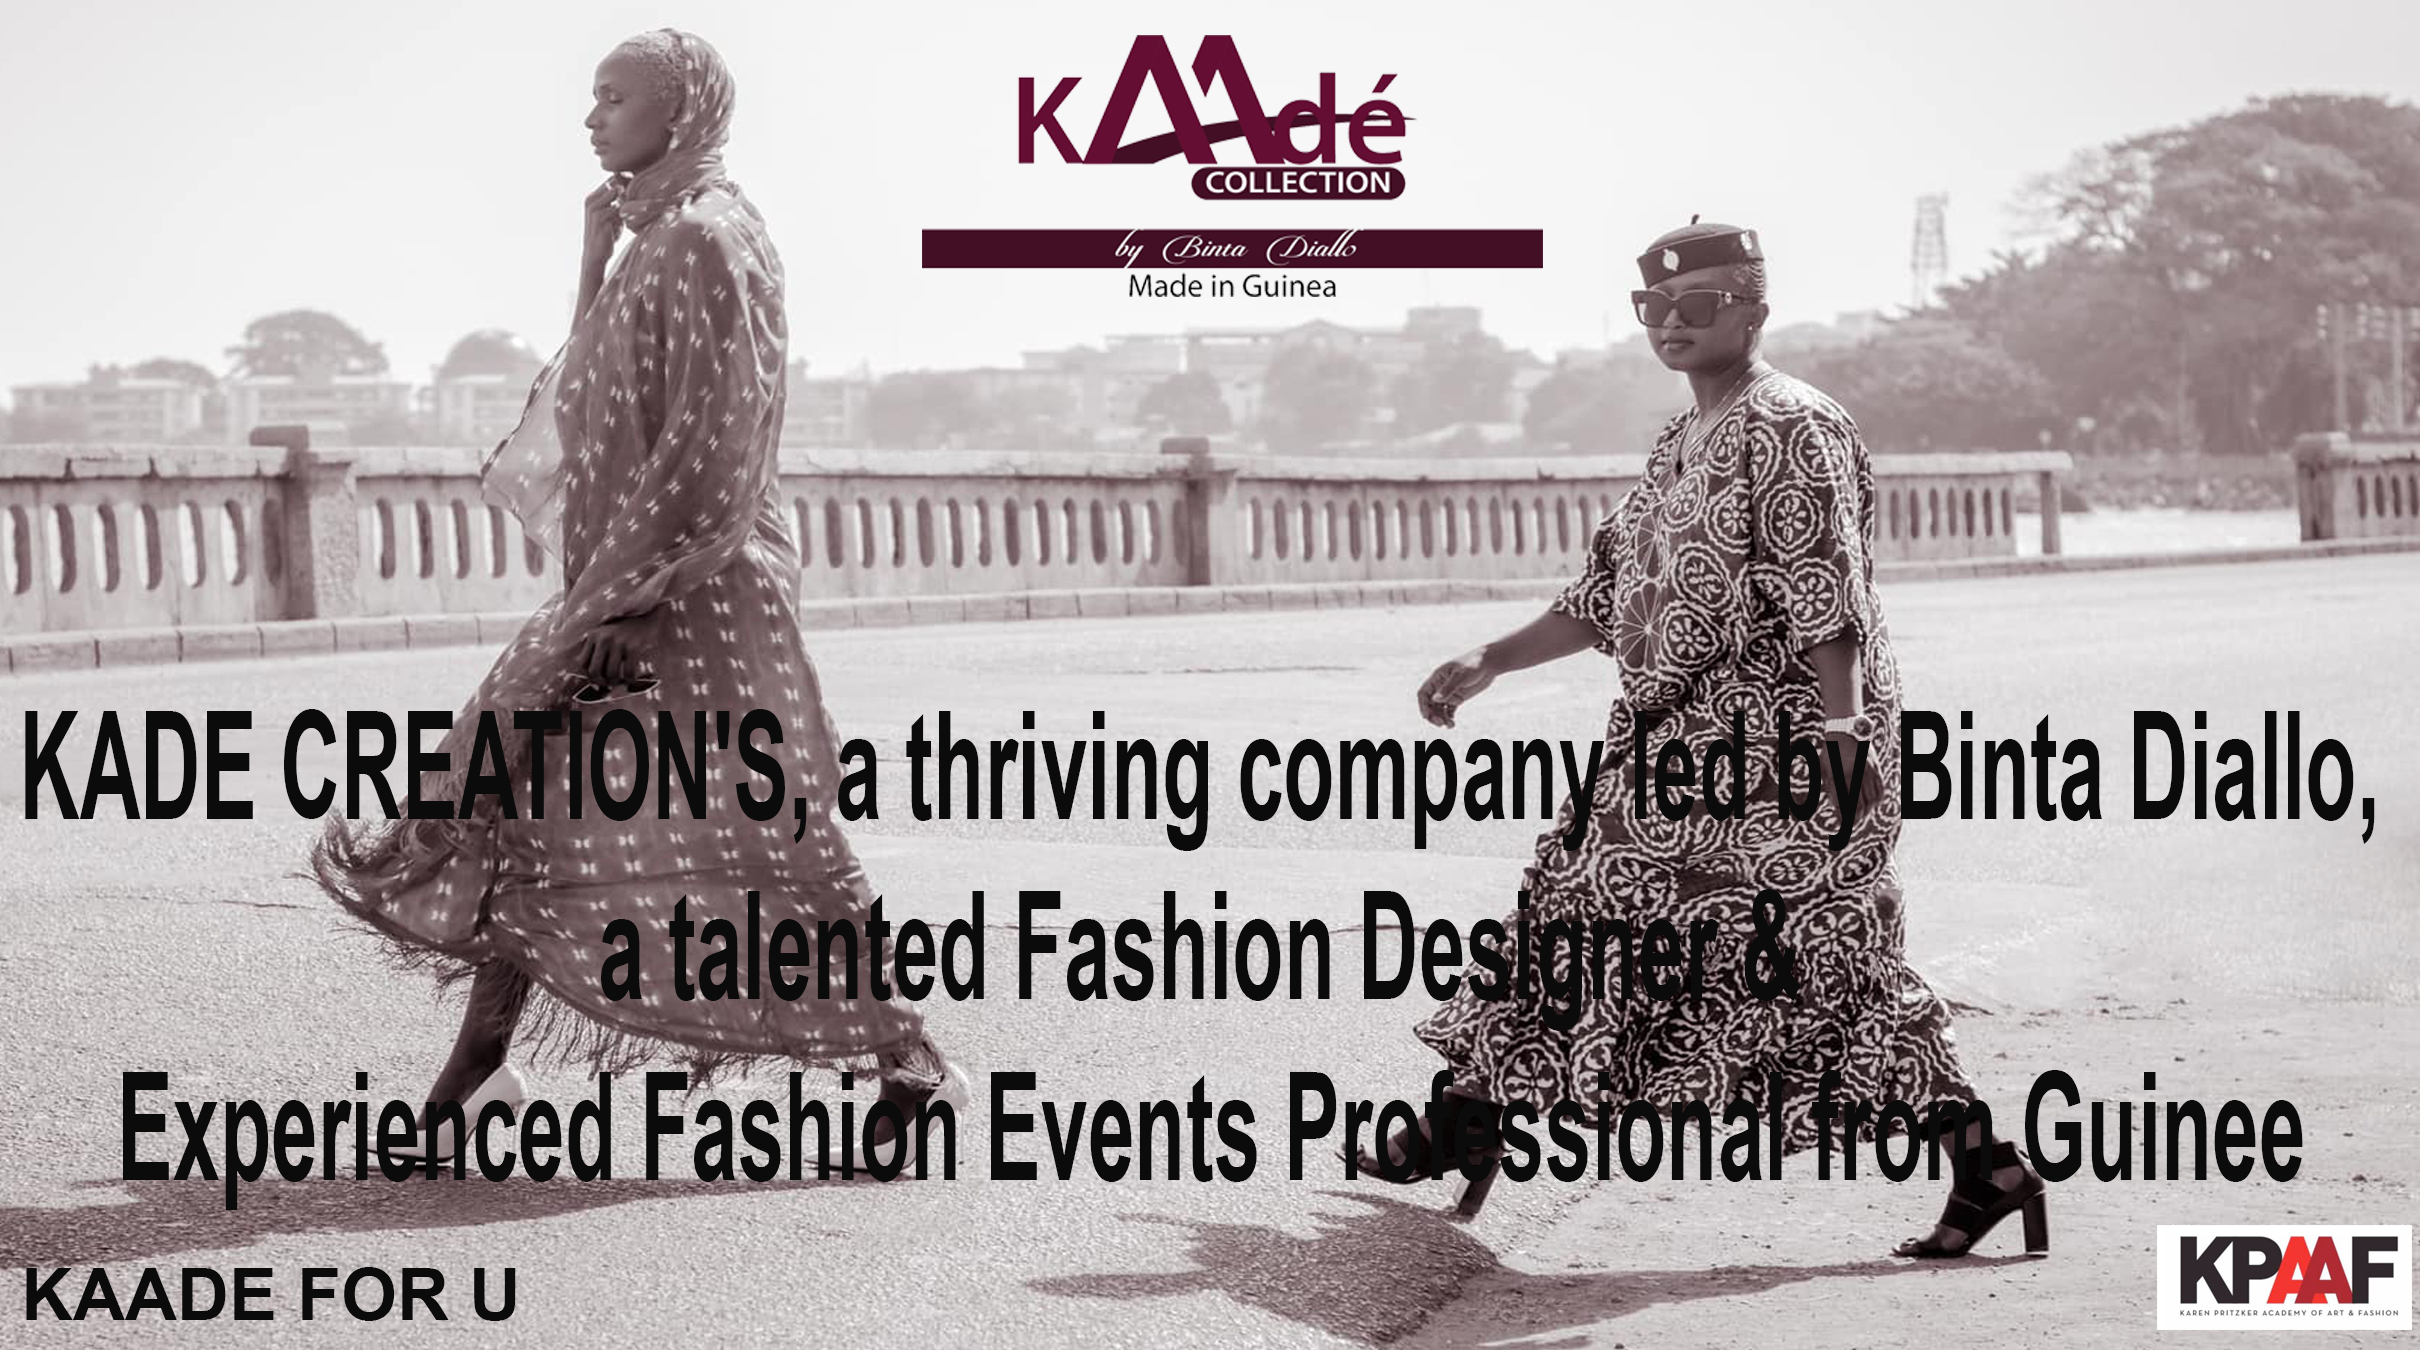 AFRICA-VOGUE-COVER-KADE-CREATION'S-a-thriving-company-led-by-Binta-Diallo,-a-talented-Fashion-Designer-&-Experienced-Fashion-Events-Professional-from-Guinee-DN-AFRICA-Media-Partner